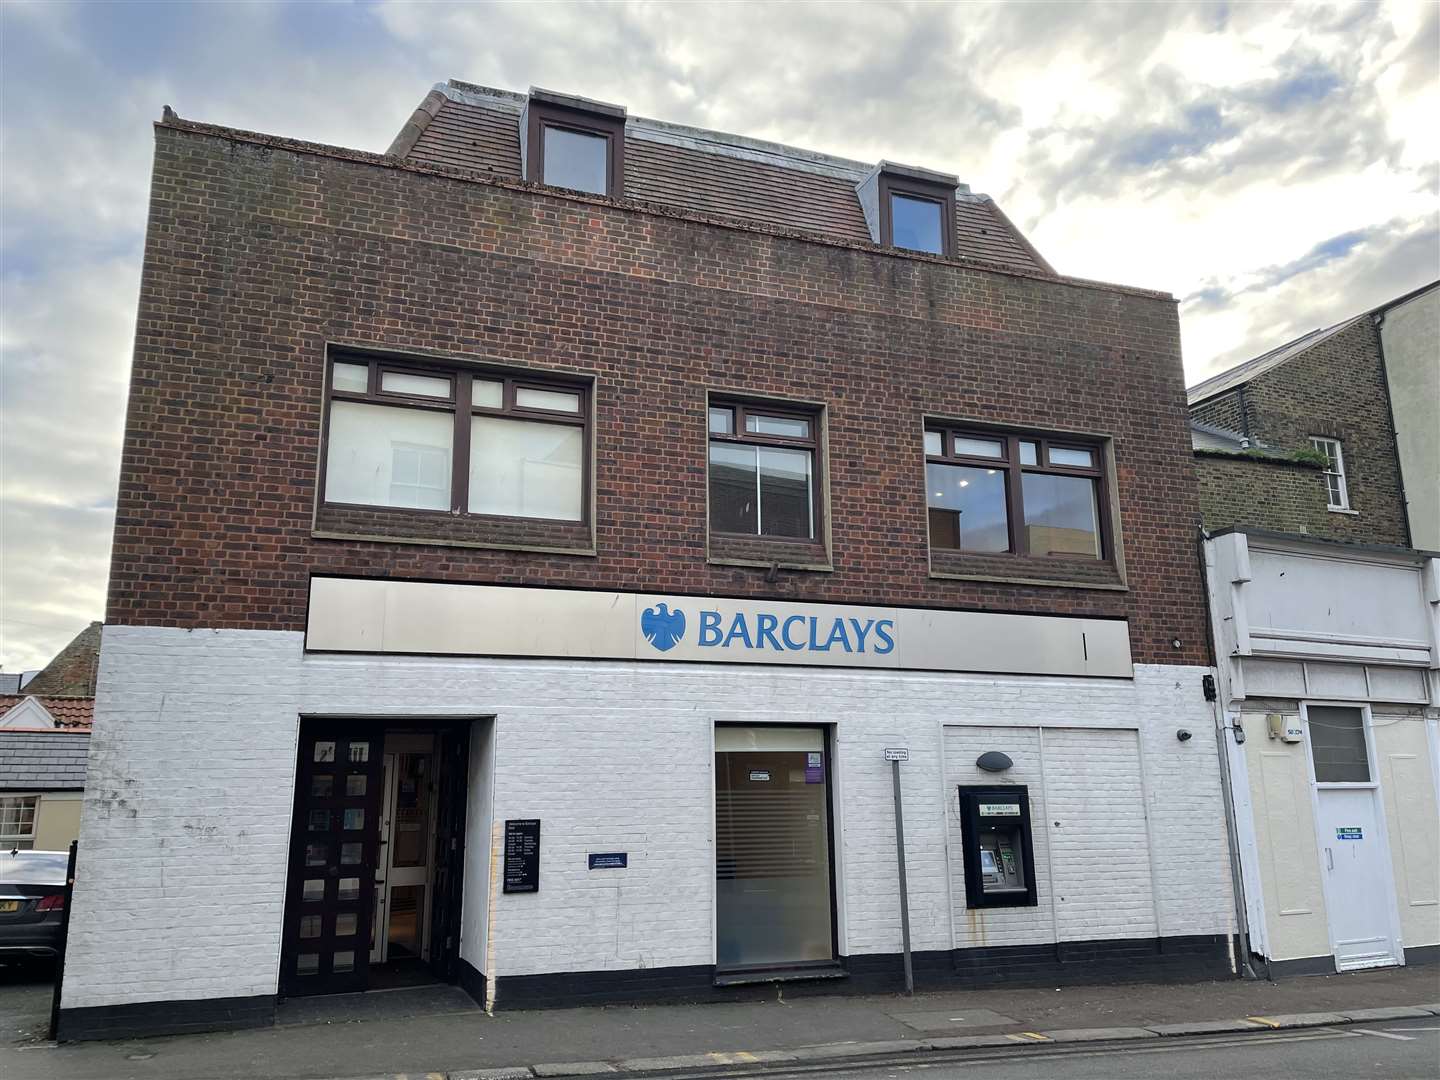 Only five cash dispensers will be left in Deal town centre following the loss of Barclays